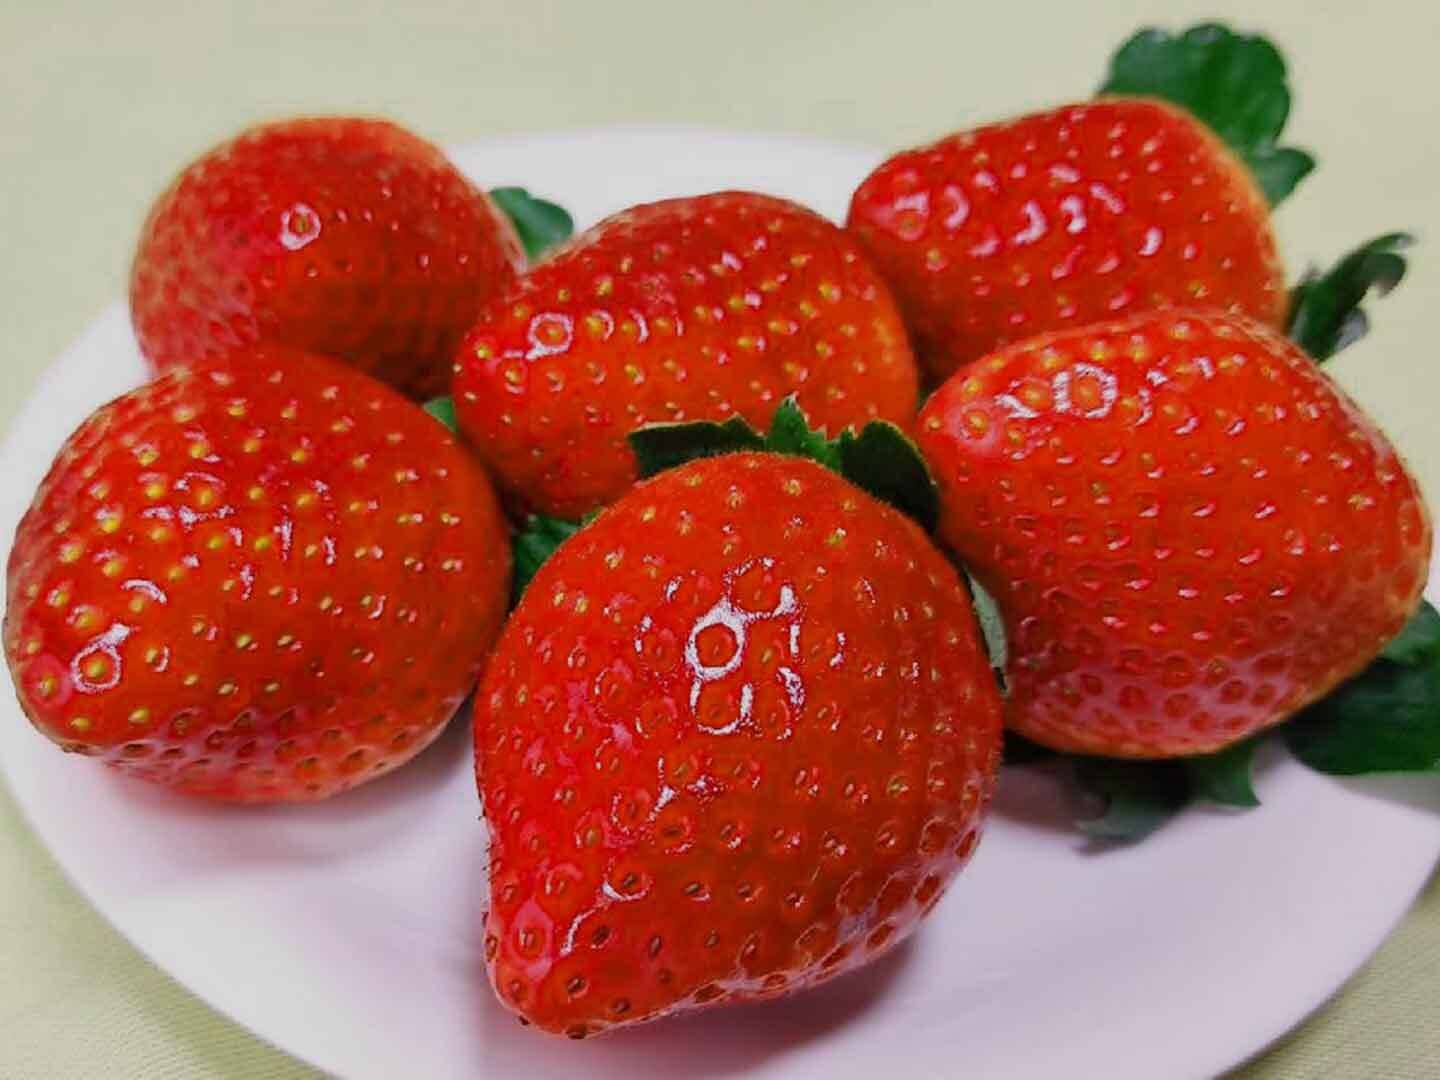 🍴 Eating choku ｜ (4P) [Strawberry / Tochiaika] A new variety with firm fruits, low acidity and outstanding sweetness ★ "Tochiaika" (XNUMX packs) Strawberries from Tochigi Prefecture The most popular strawberry set ...